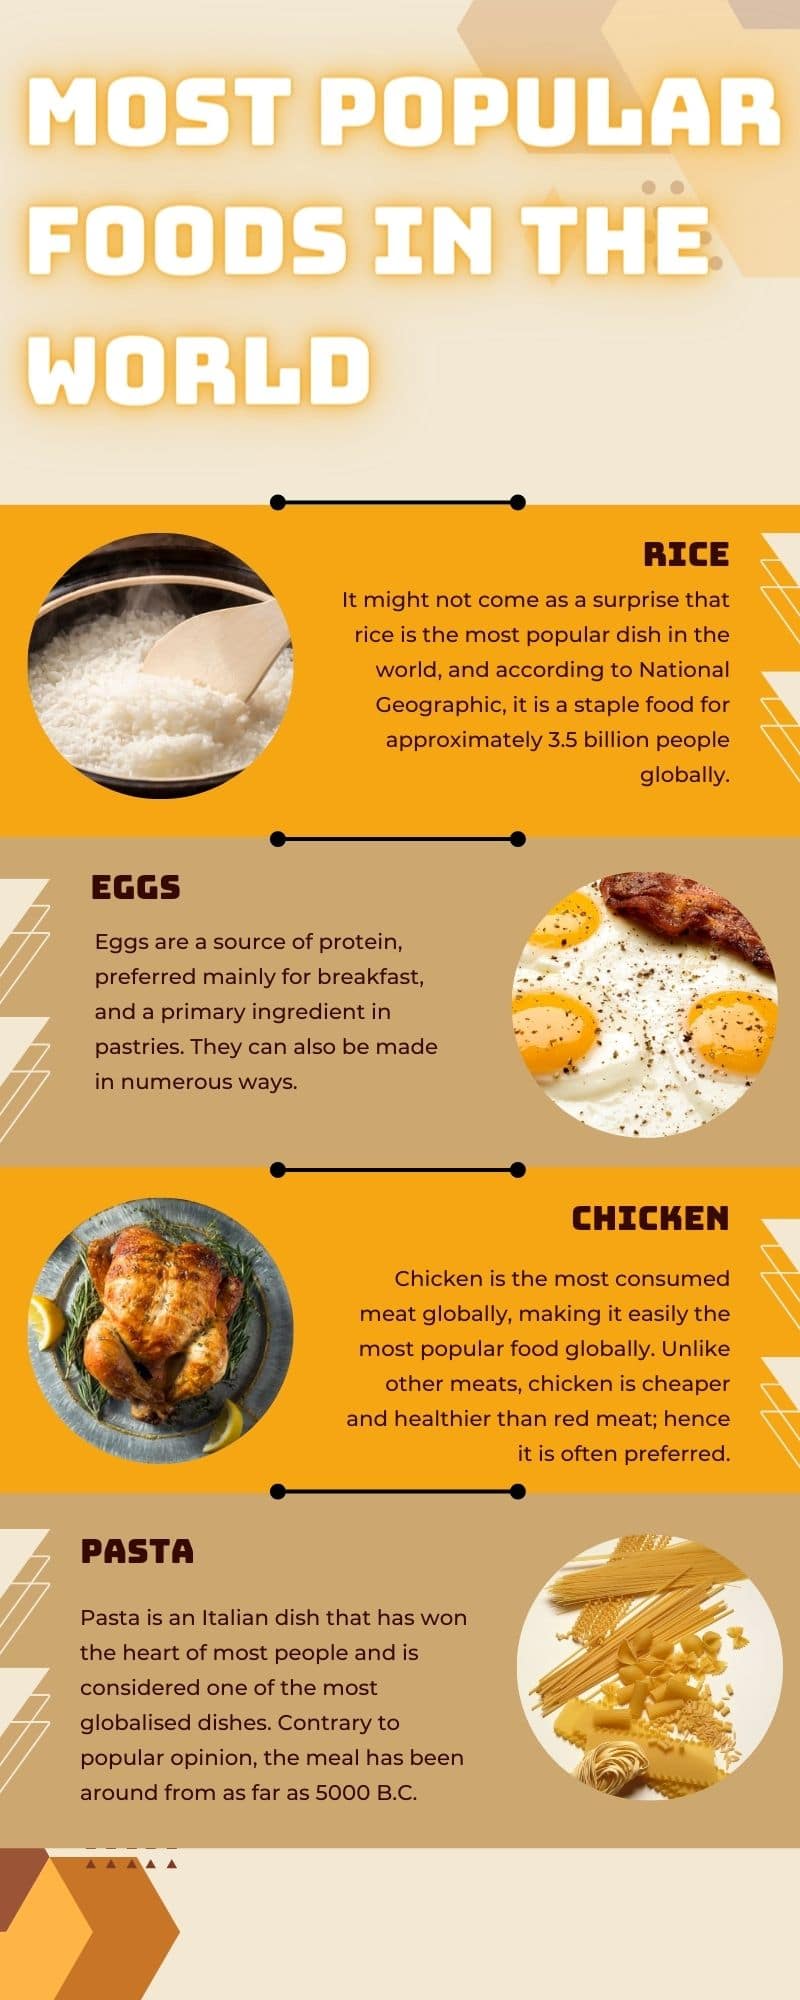 Most popular foods in the world